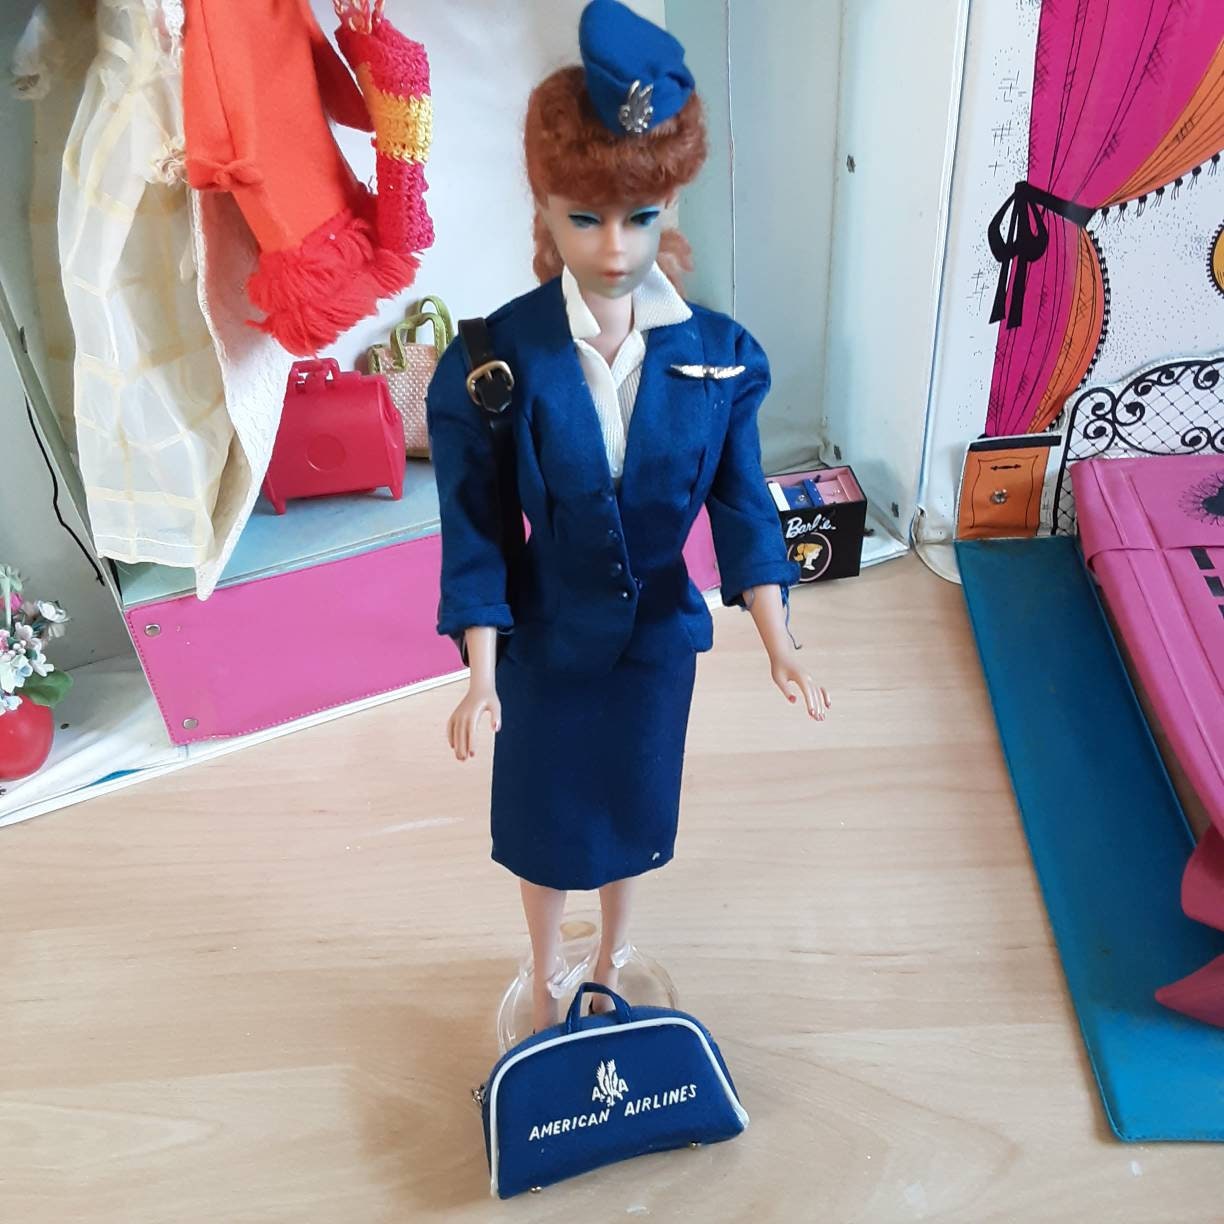 1960's Barbie American Airline Outfit - Etsy